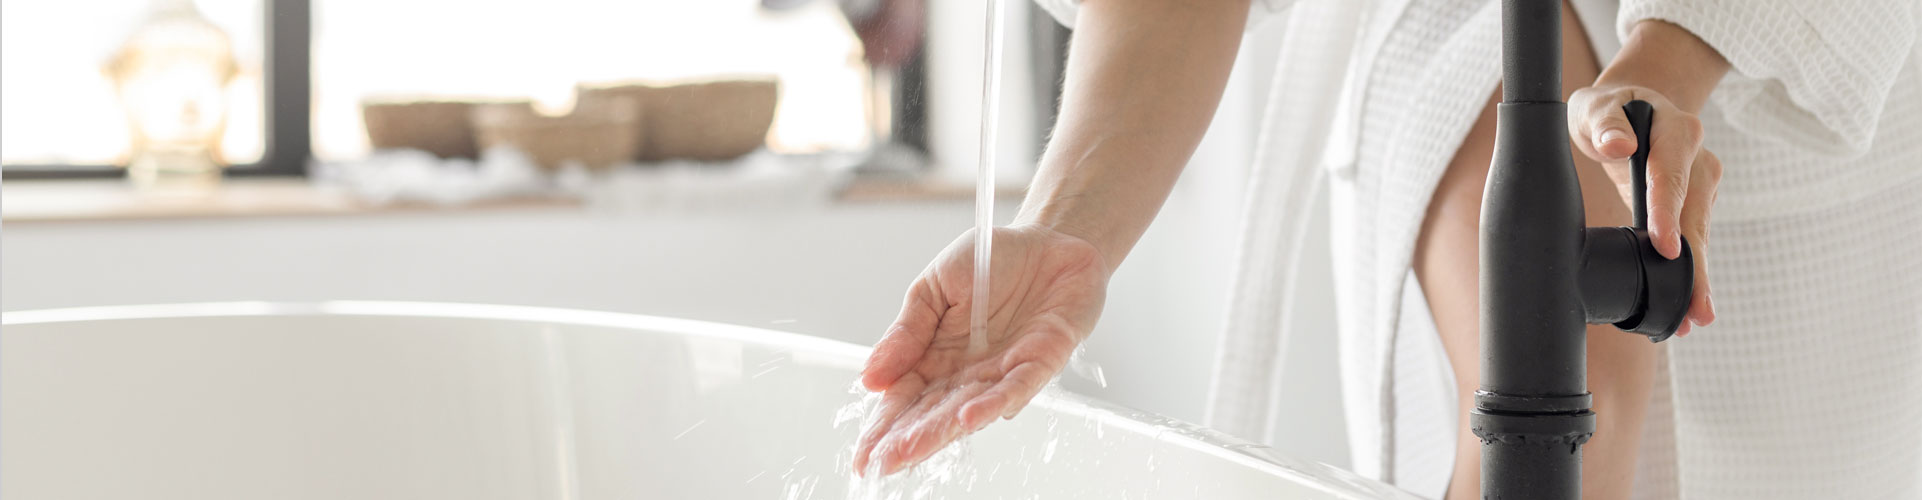 Woman drawing a bath with warm water supplied by a Santoro installed hot water heater